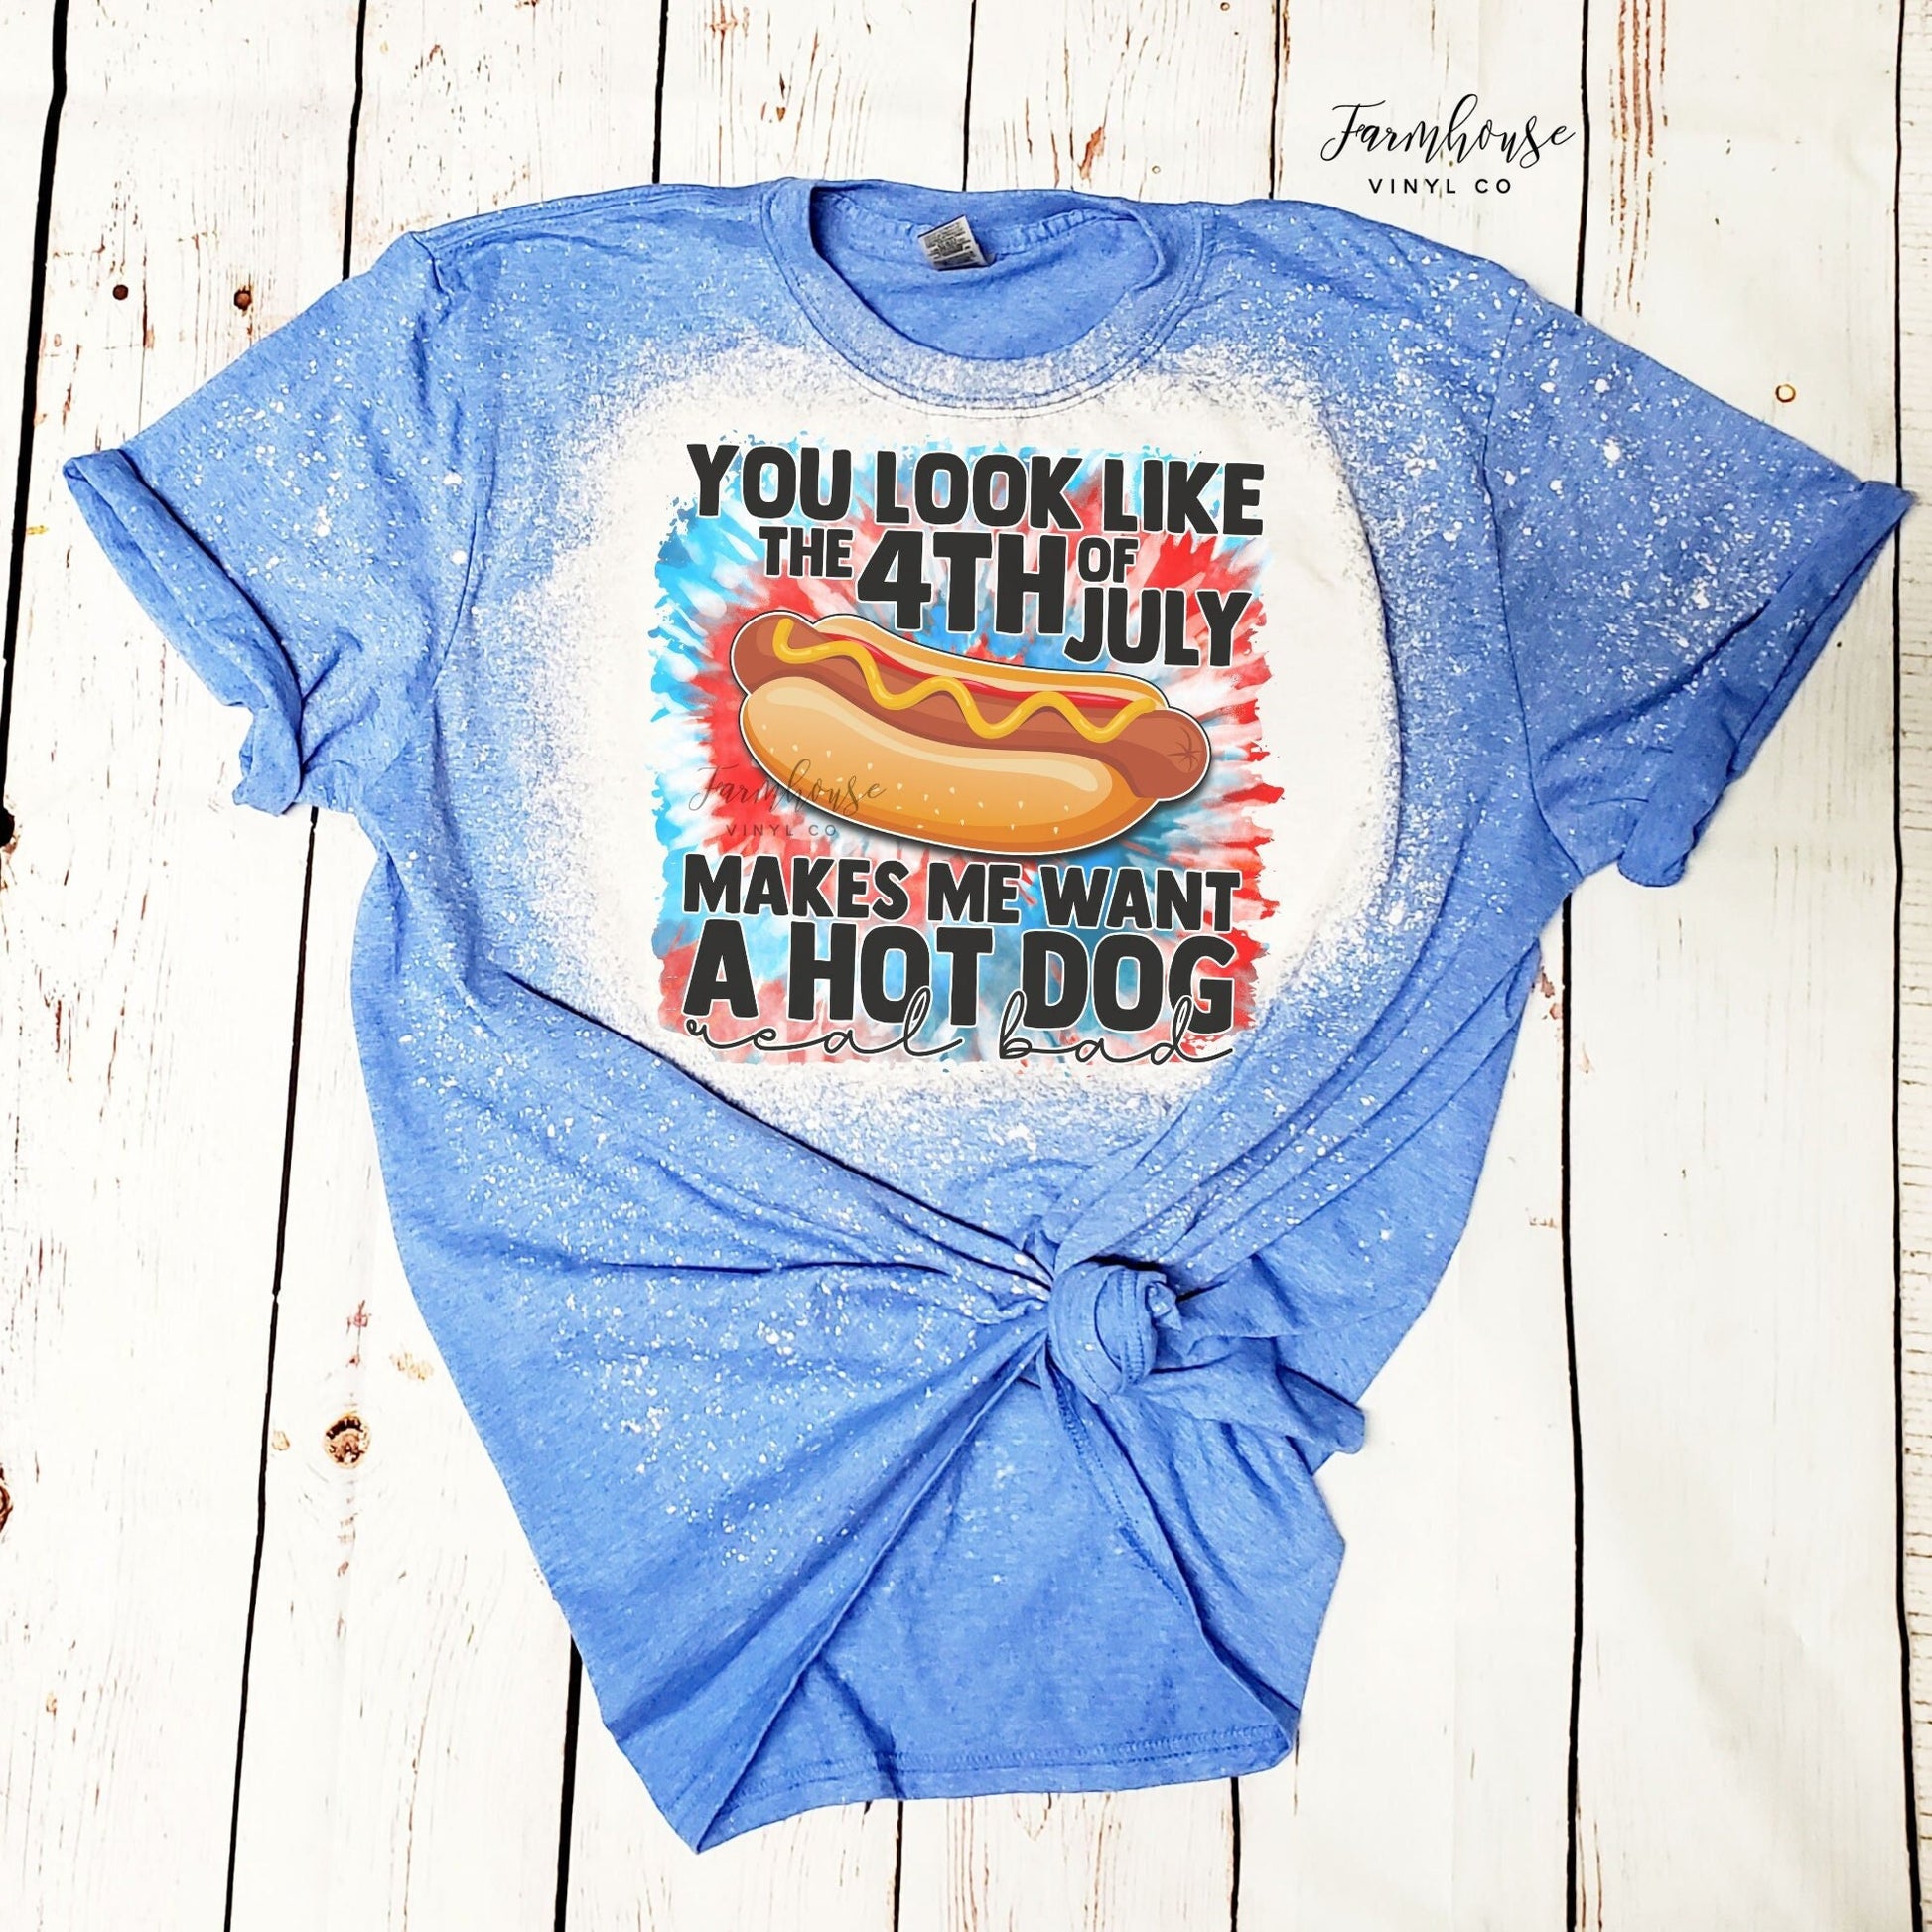 You Look Like the 4th of July Makes Me Want A Hotdog Real Bad Bleached Shirt / 4th of July / Independence Day Funny Shirt / Summer BBQ Shirt - Farmhouse Vinyl Co